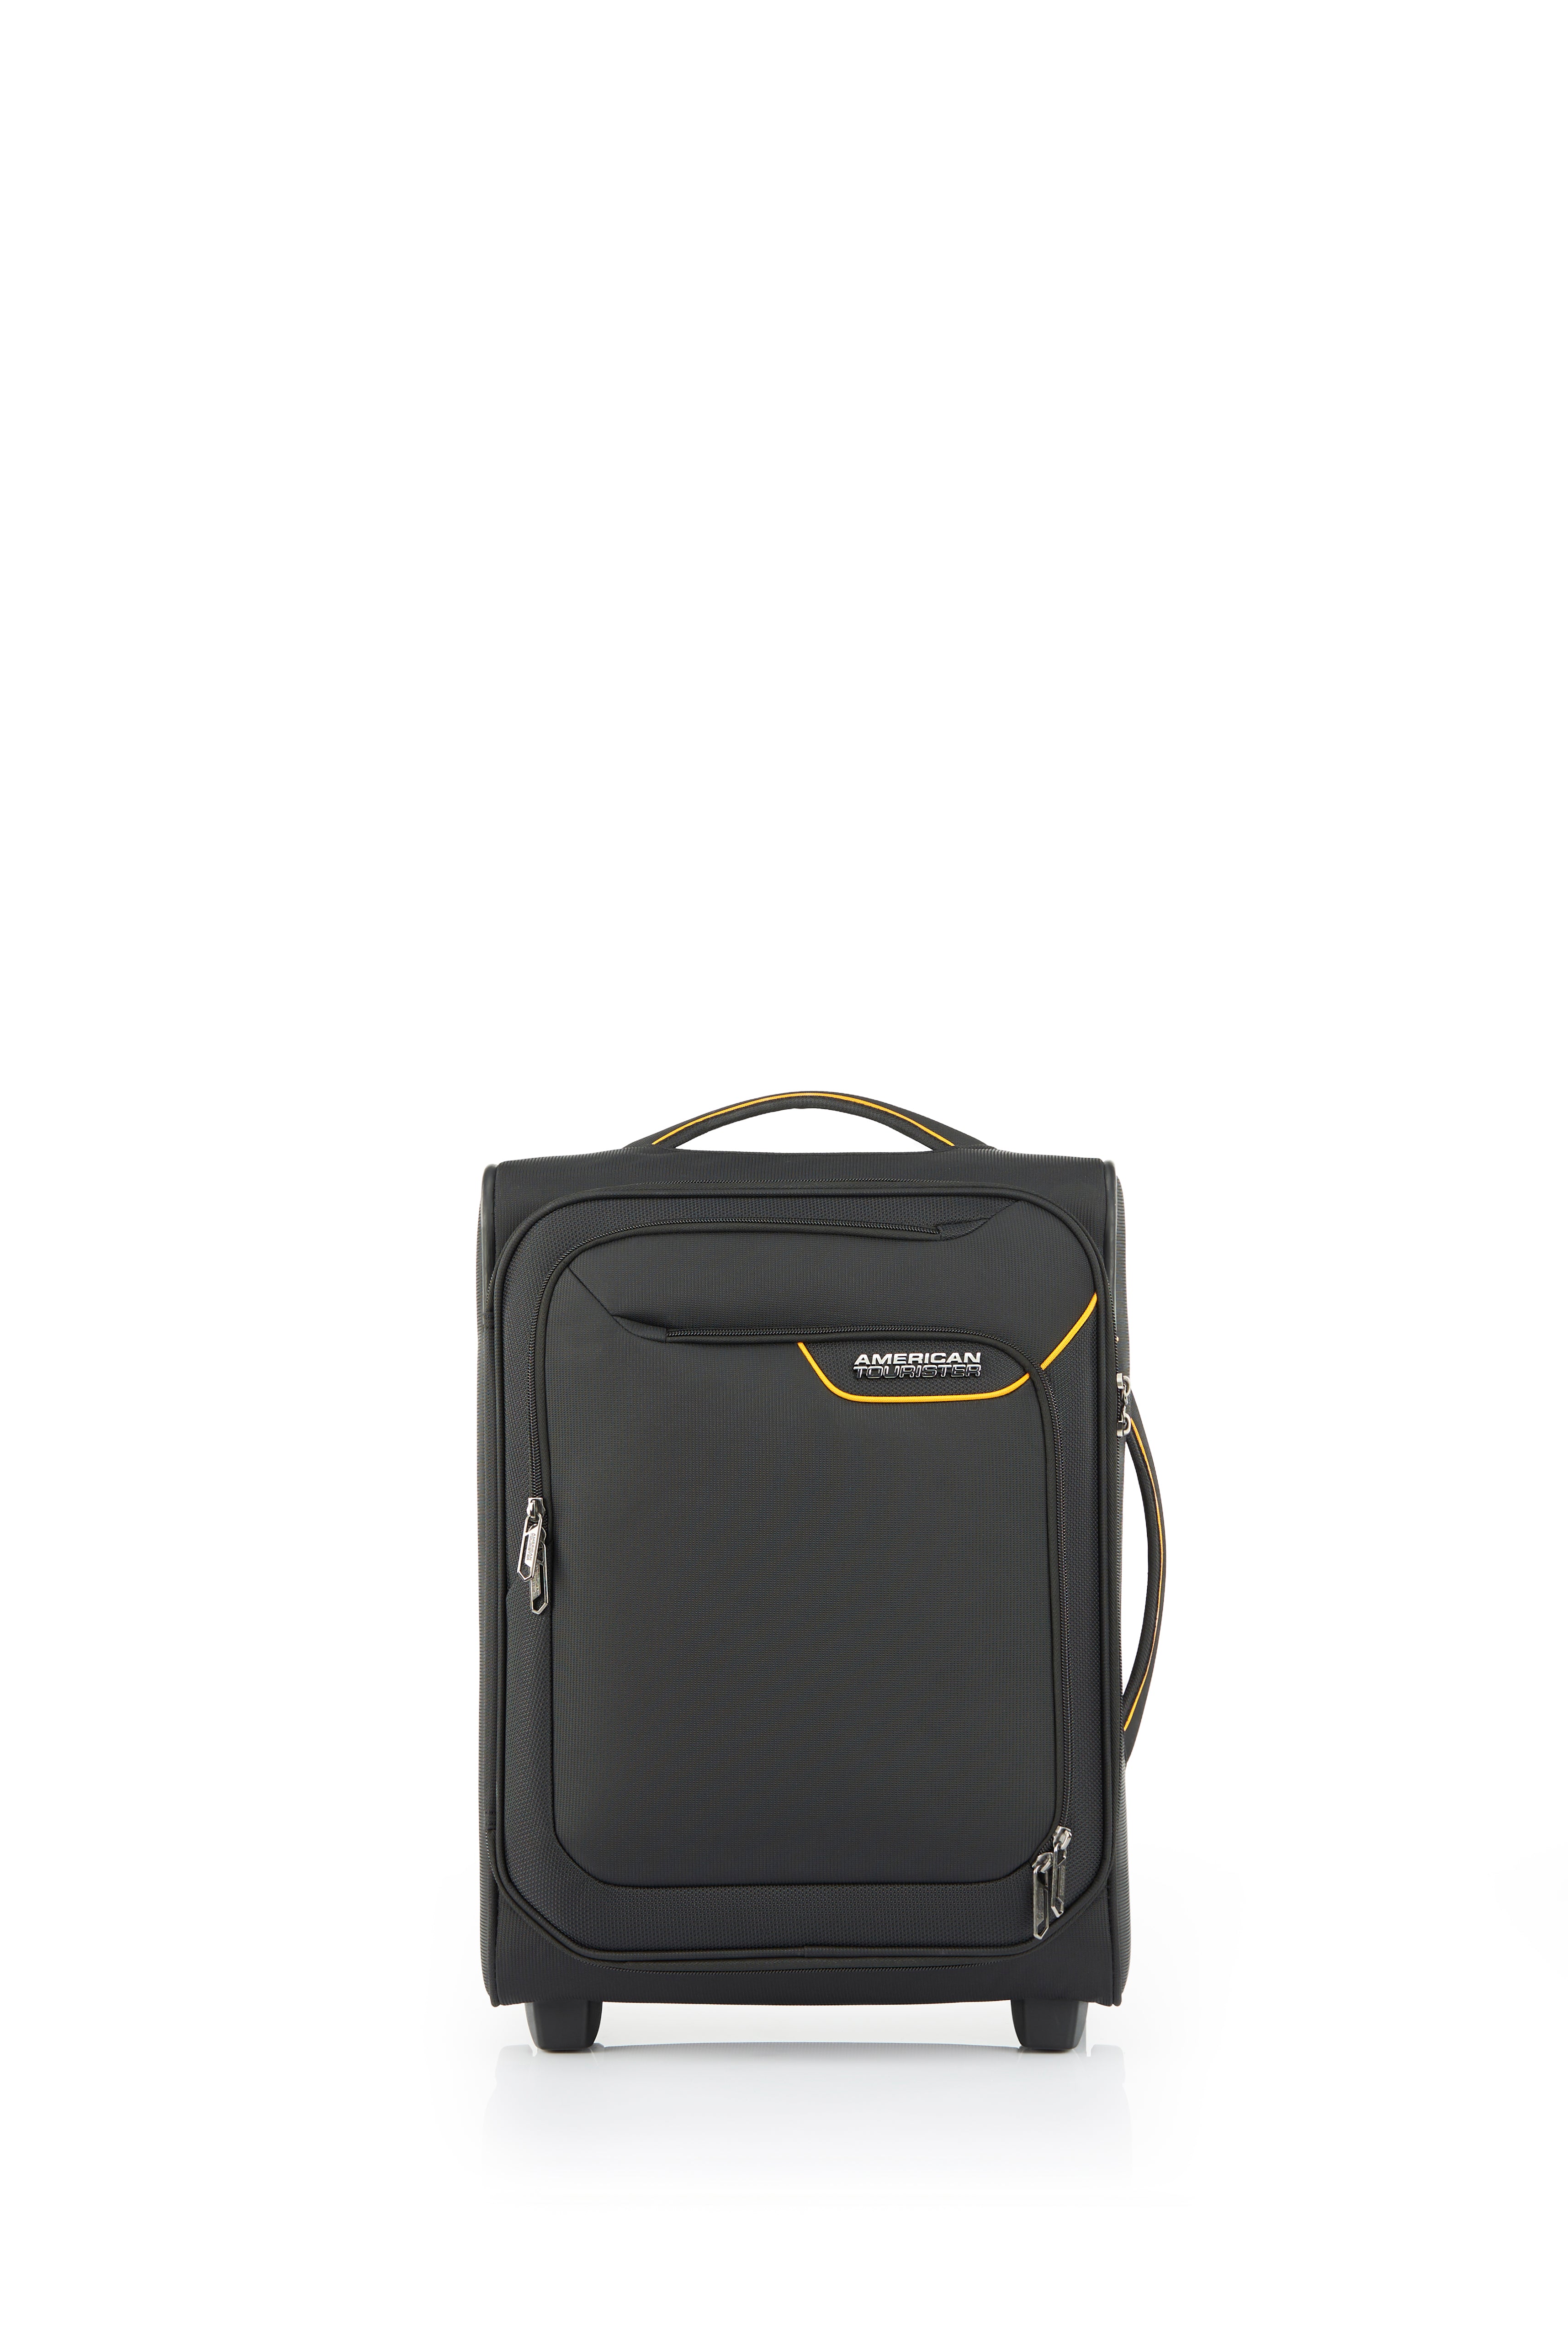 American Tourister - Applite ECO 50cm Small Suitcase - Black/Must - 0